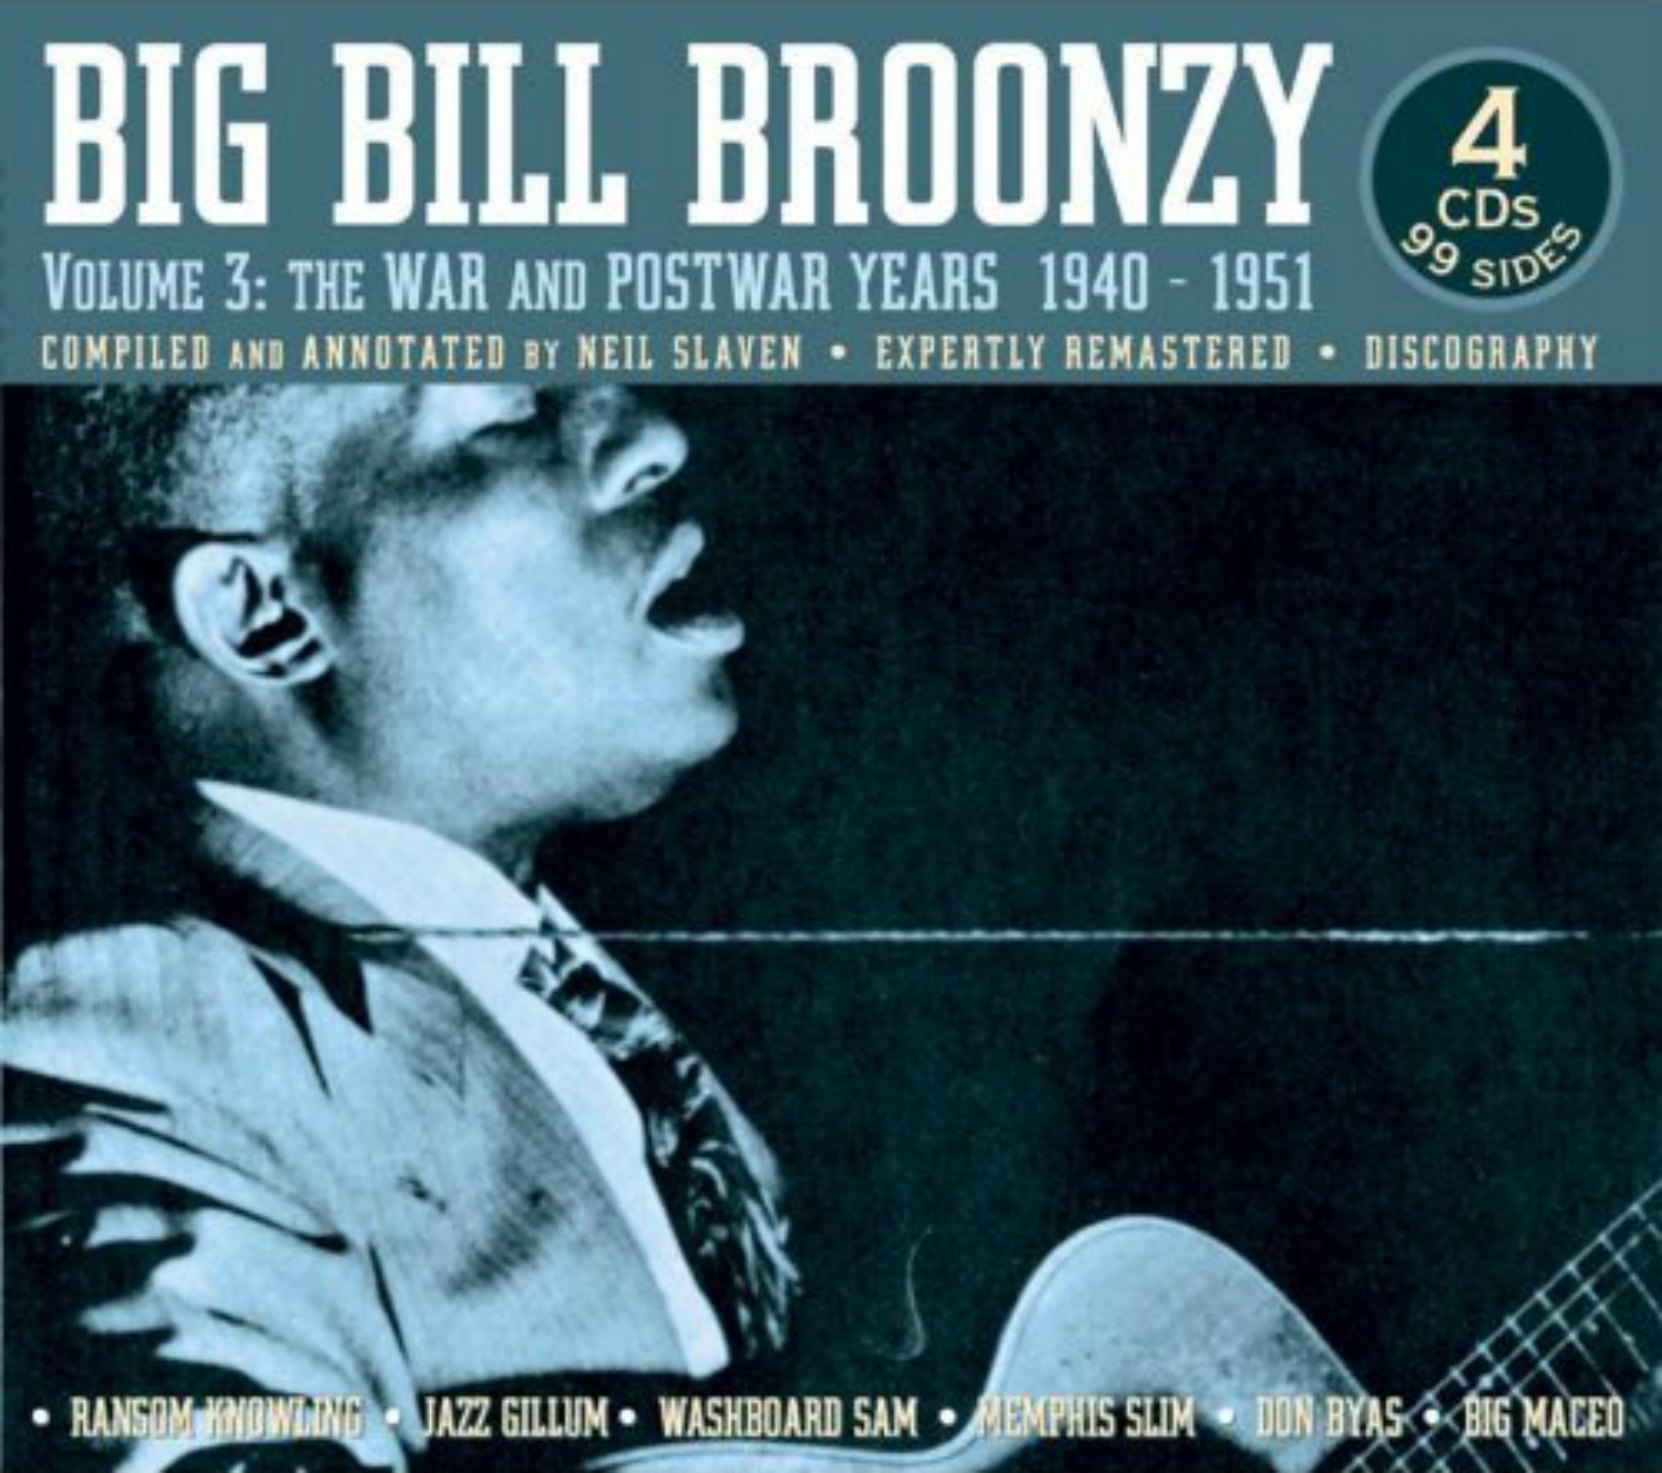 CD cover. Big Bill Broonzy, Volume 2: The War and Postwar years 1940-51, on JSP Records